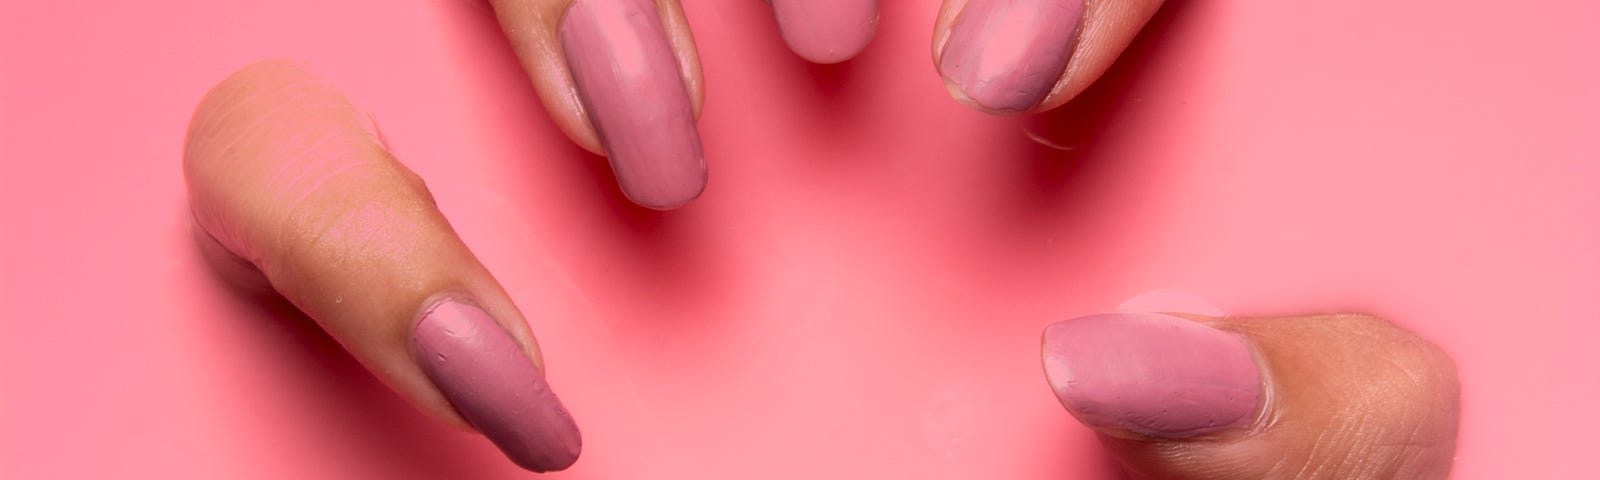 Horribly manicured hand with pink nail polish scratching out of a pink background.